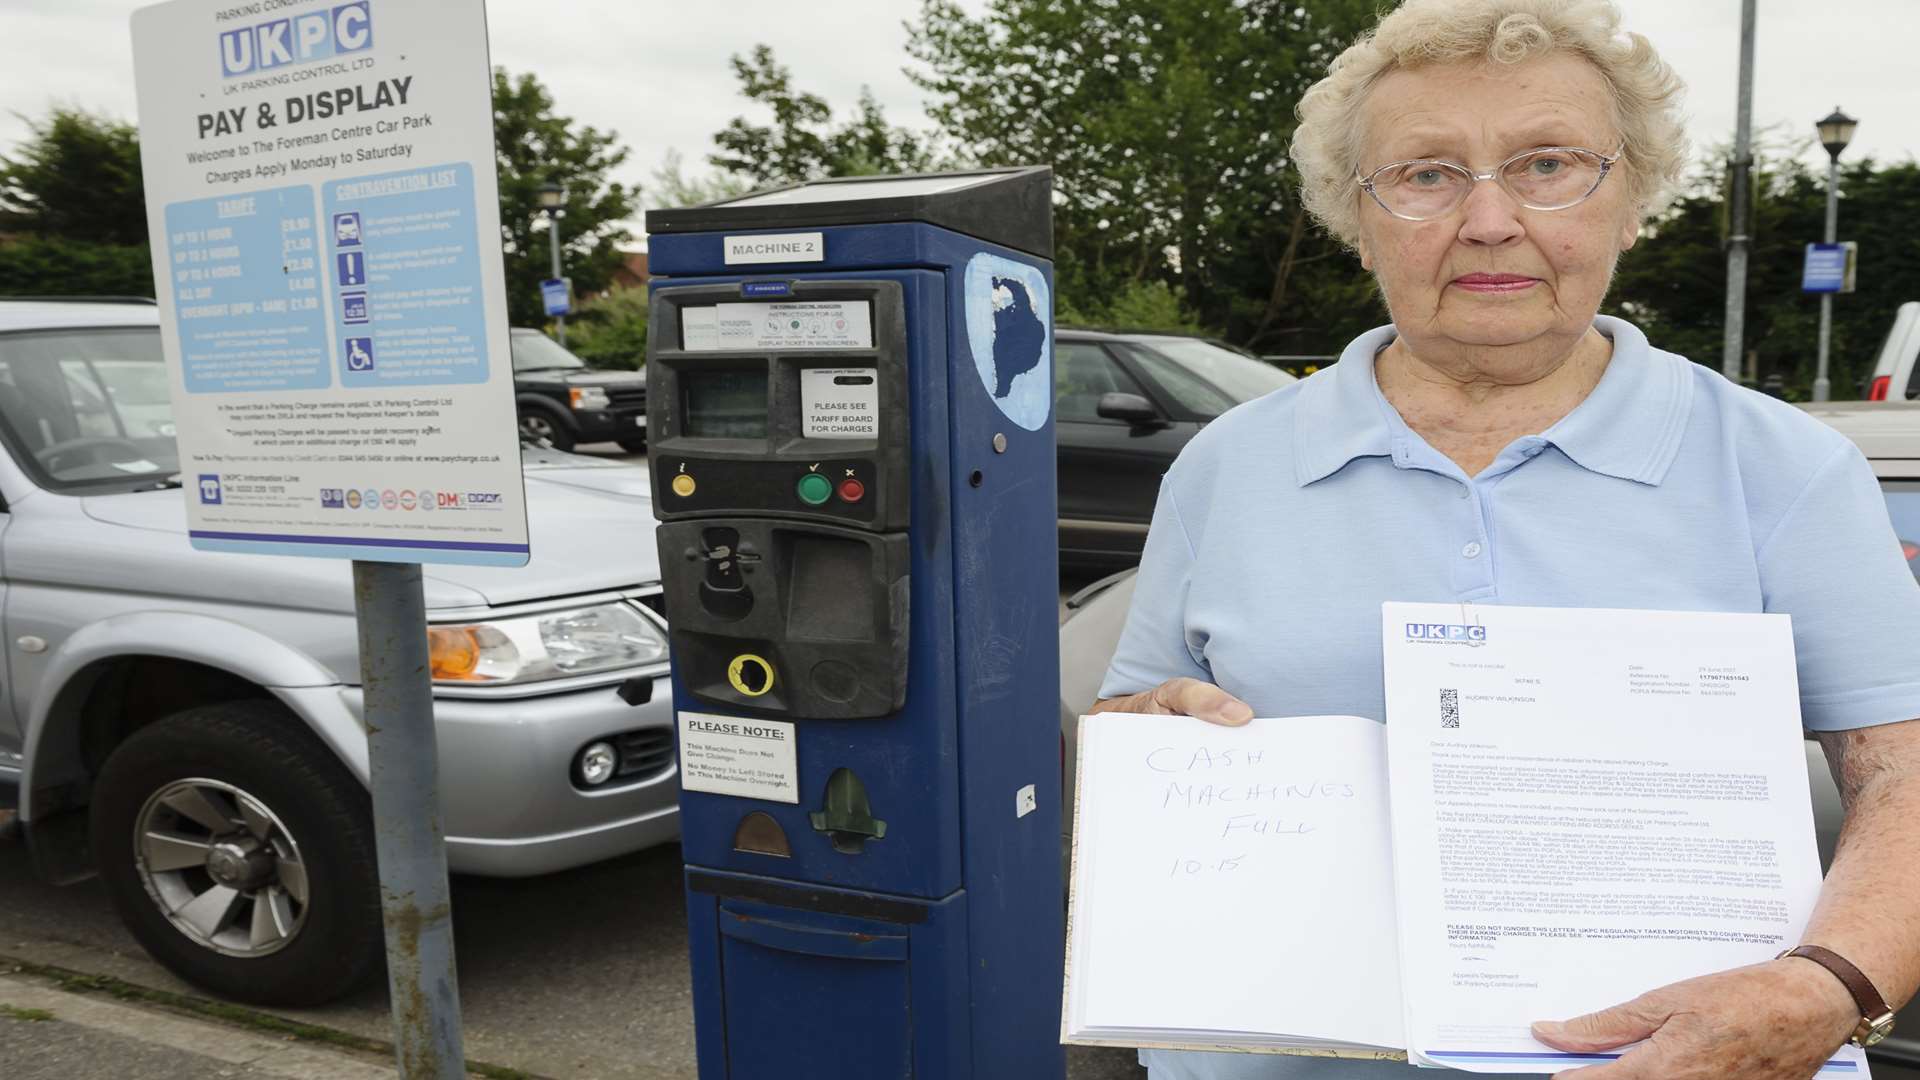 Audrey Wilkinson, who was given a parking ticket even though the machines were not working